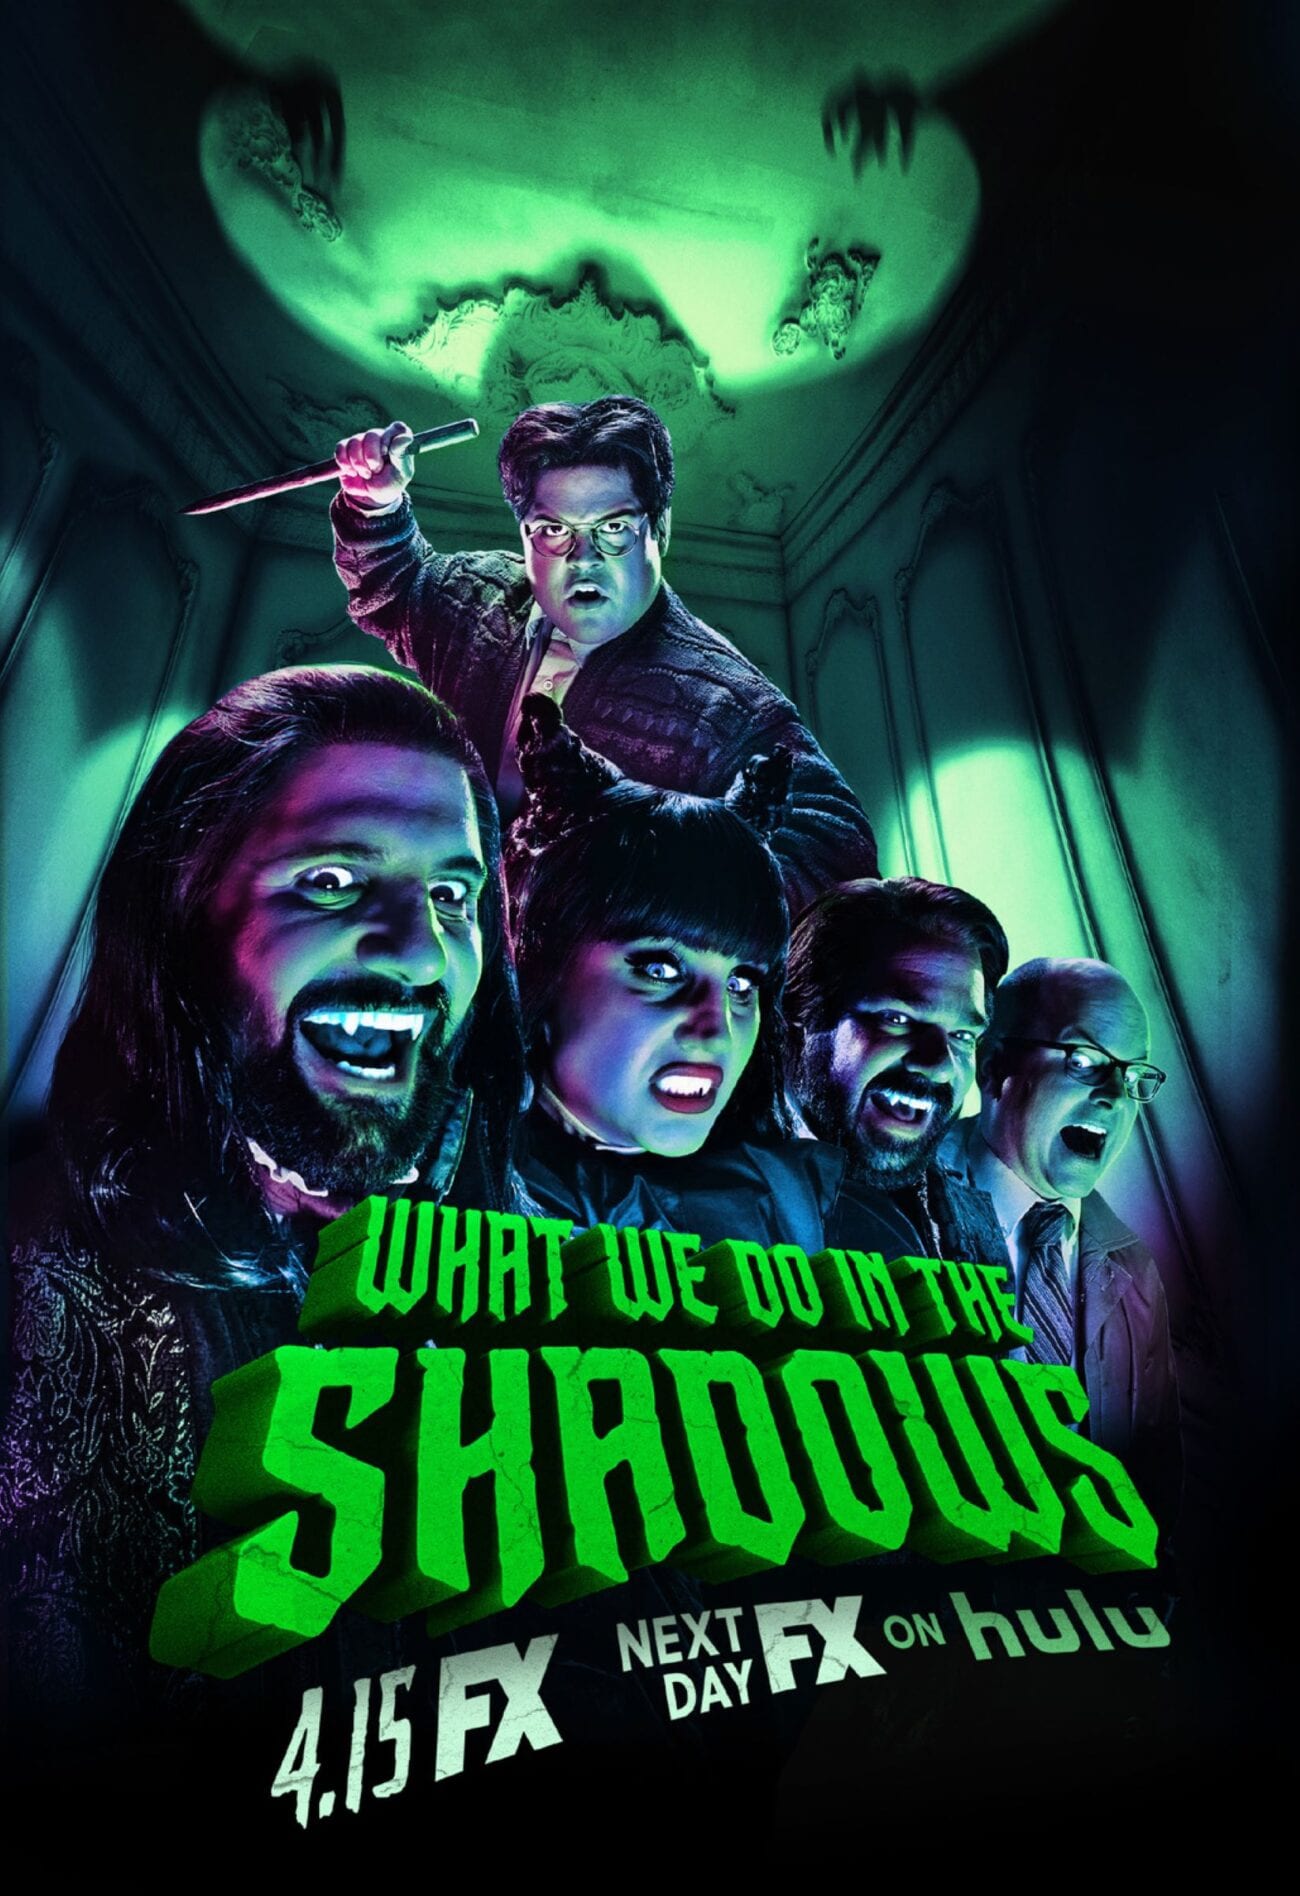 The vampire drama from Taiki Watiti has been transformed into a black comedy for the ages. You need to be watching 'What we do in the Shadows' on FX.